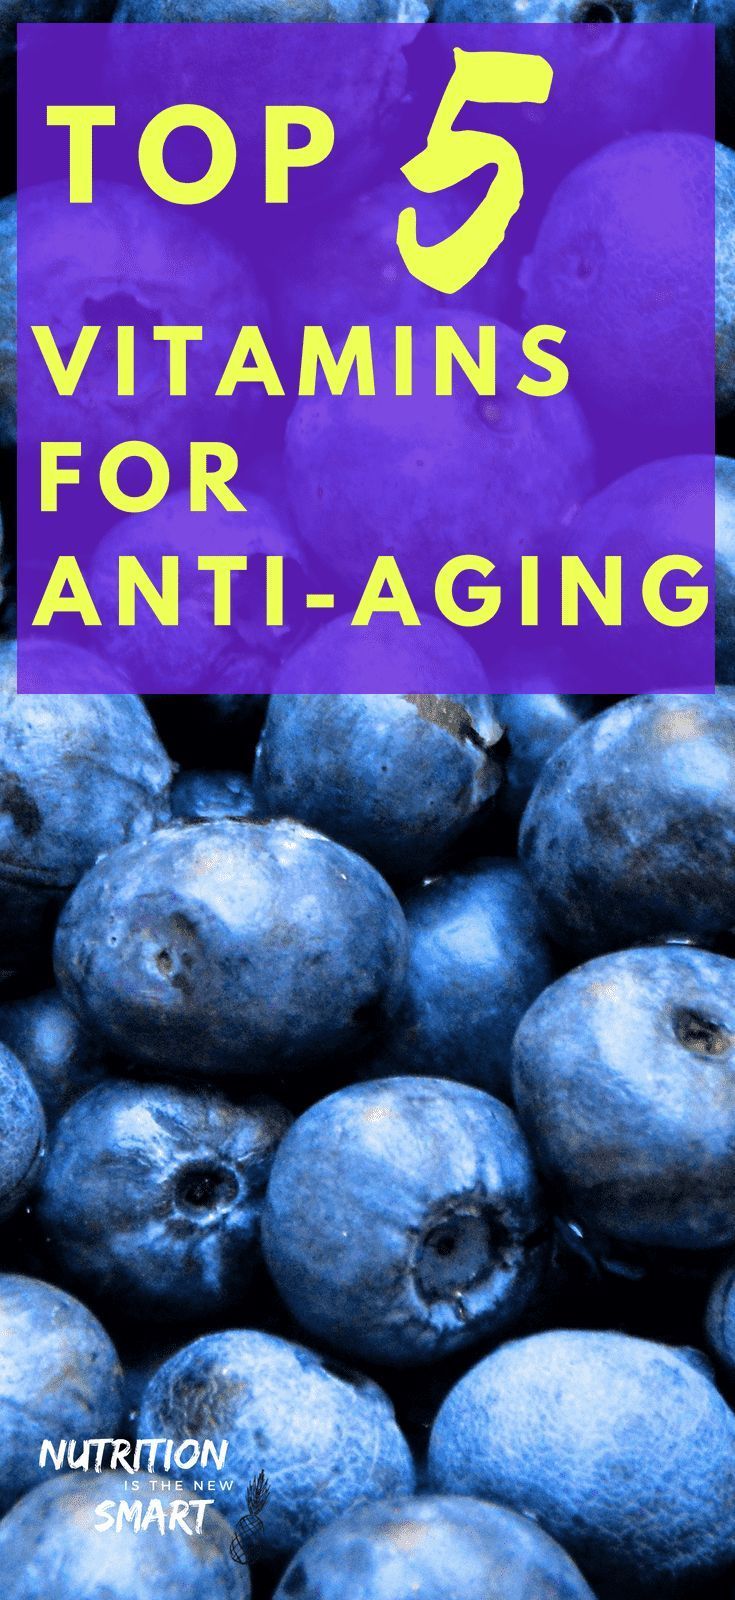 Prevent aging and stay young! - Proven methods for anti aging -   15 skin care Natural tips
 ideas